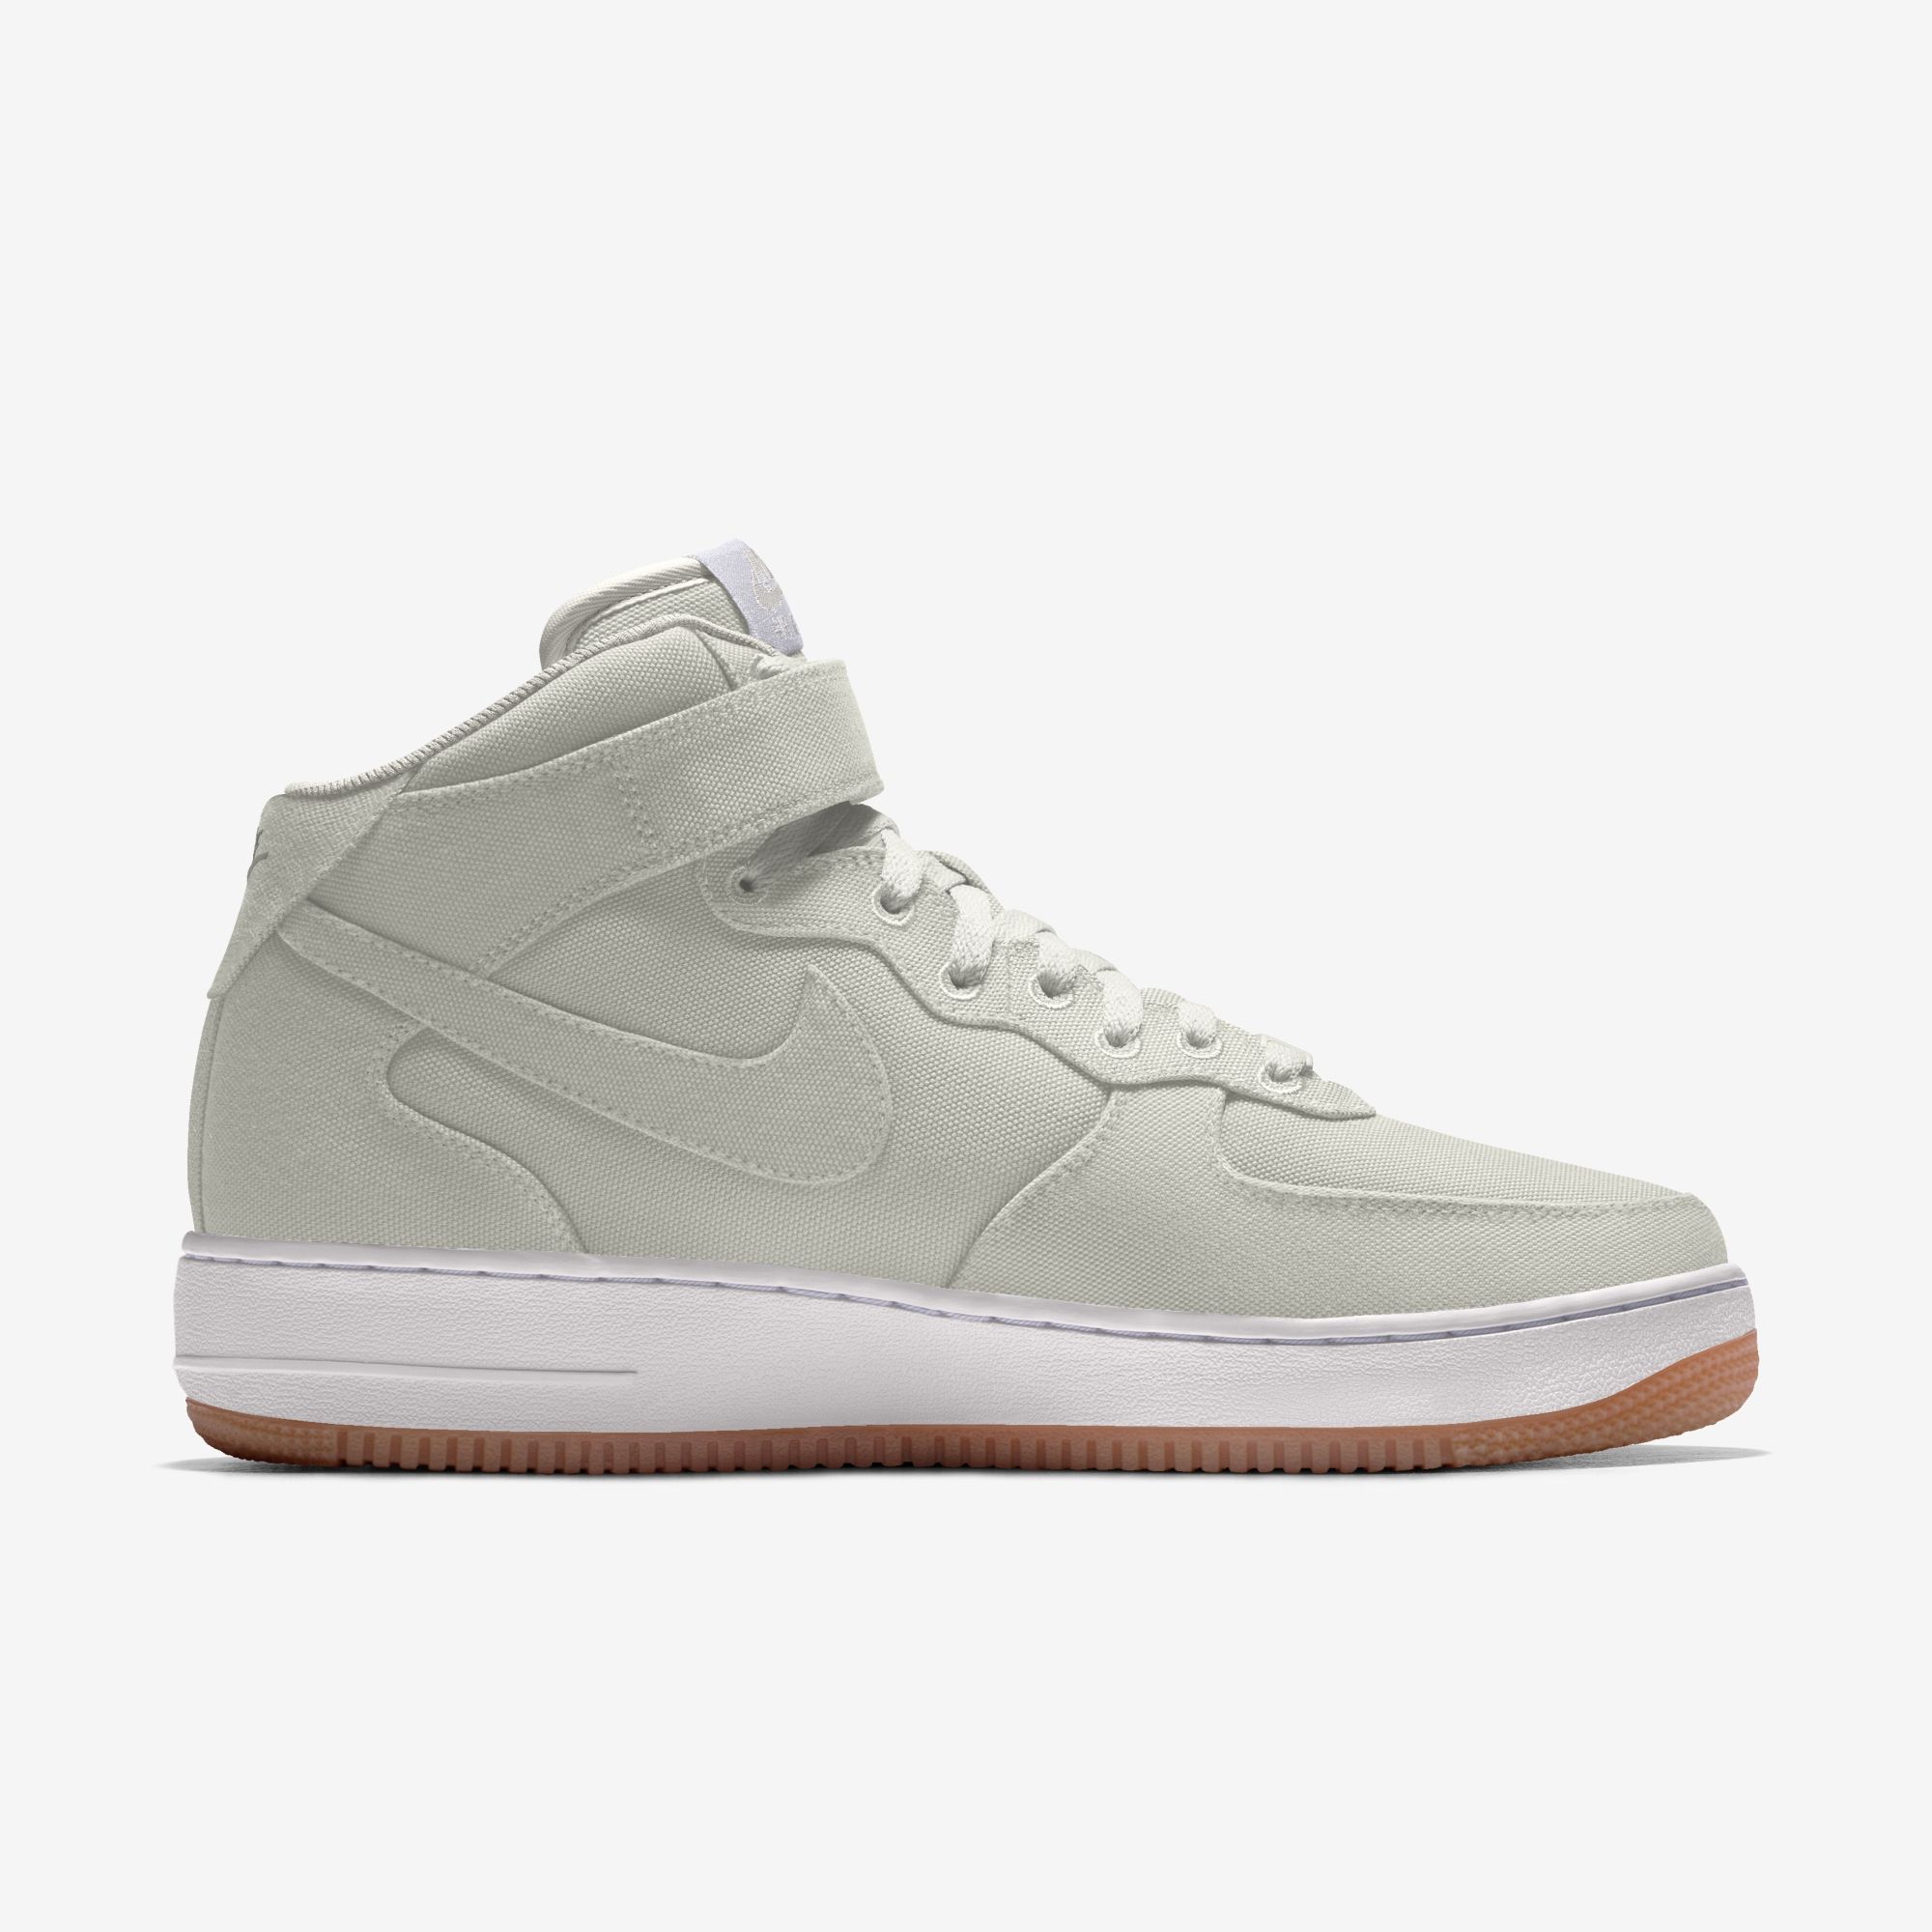  Nike Air Force 1 Mid By You - Light Bone Canvas 